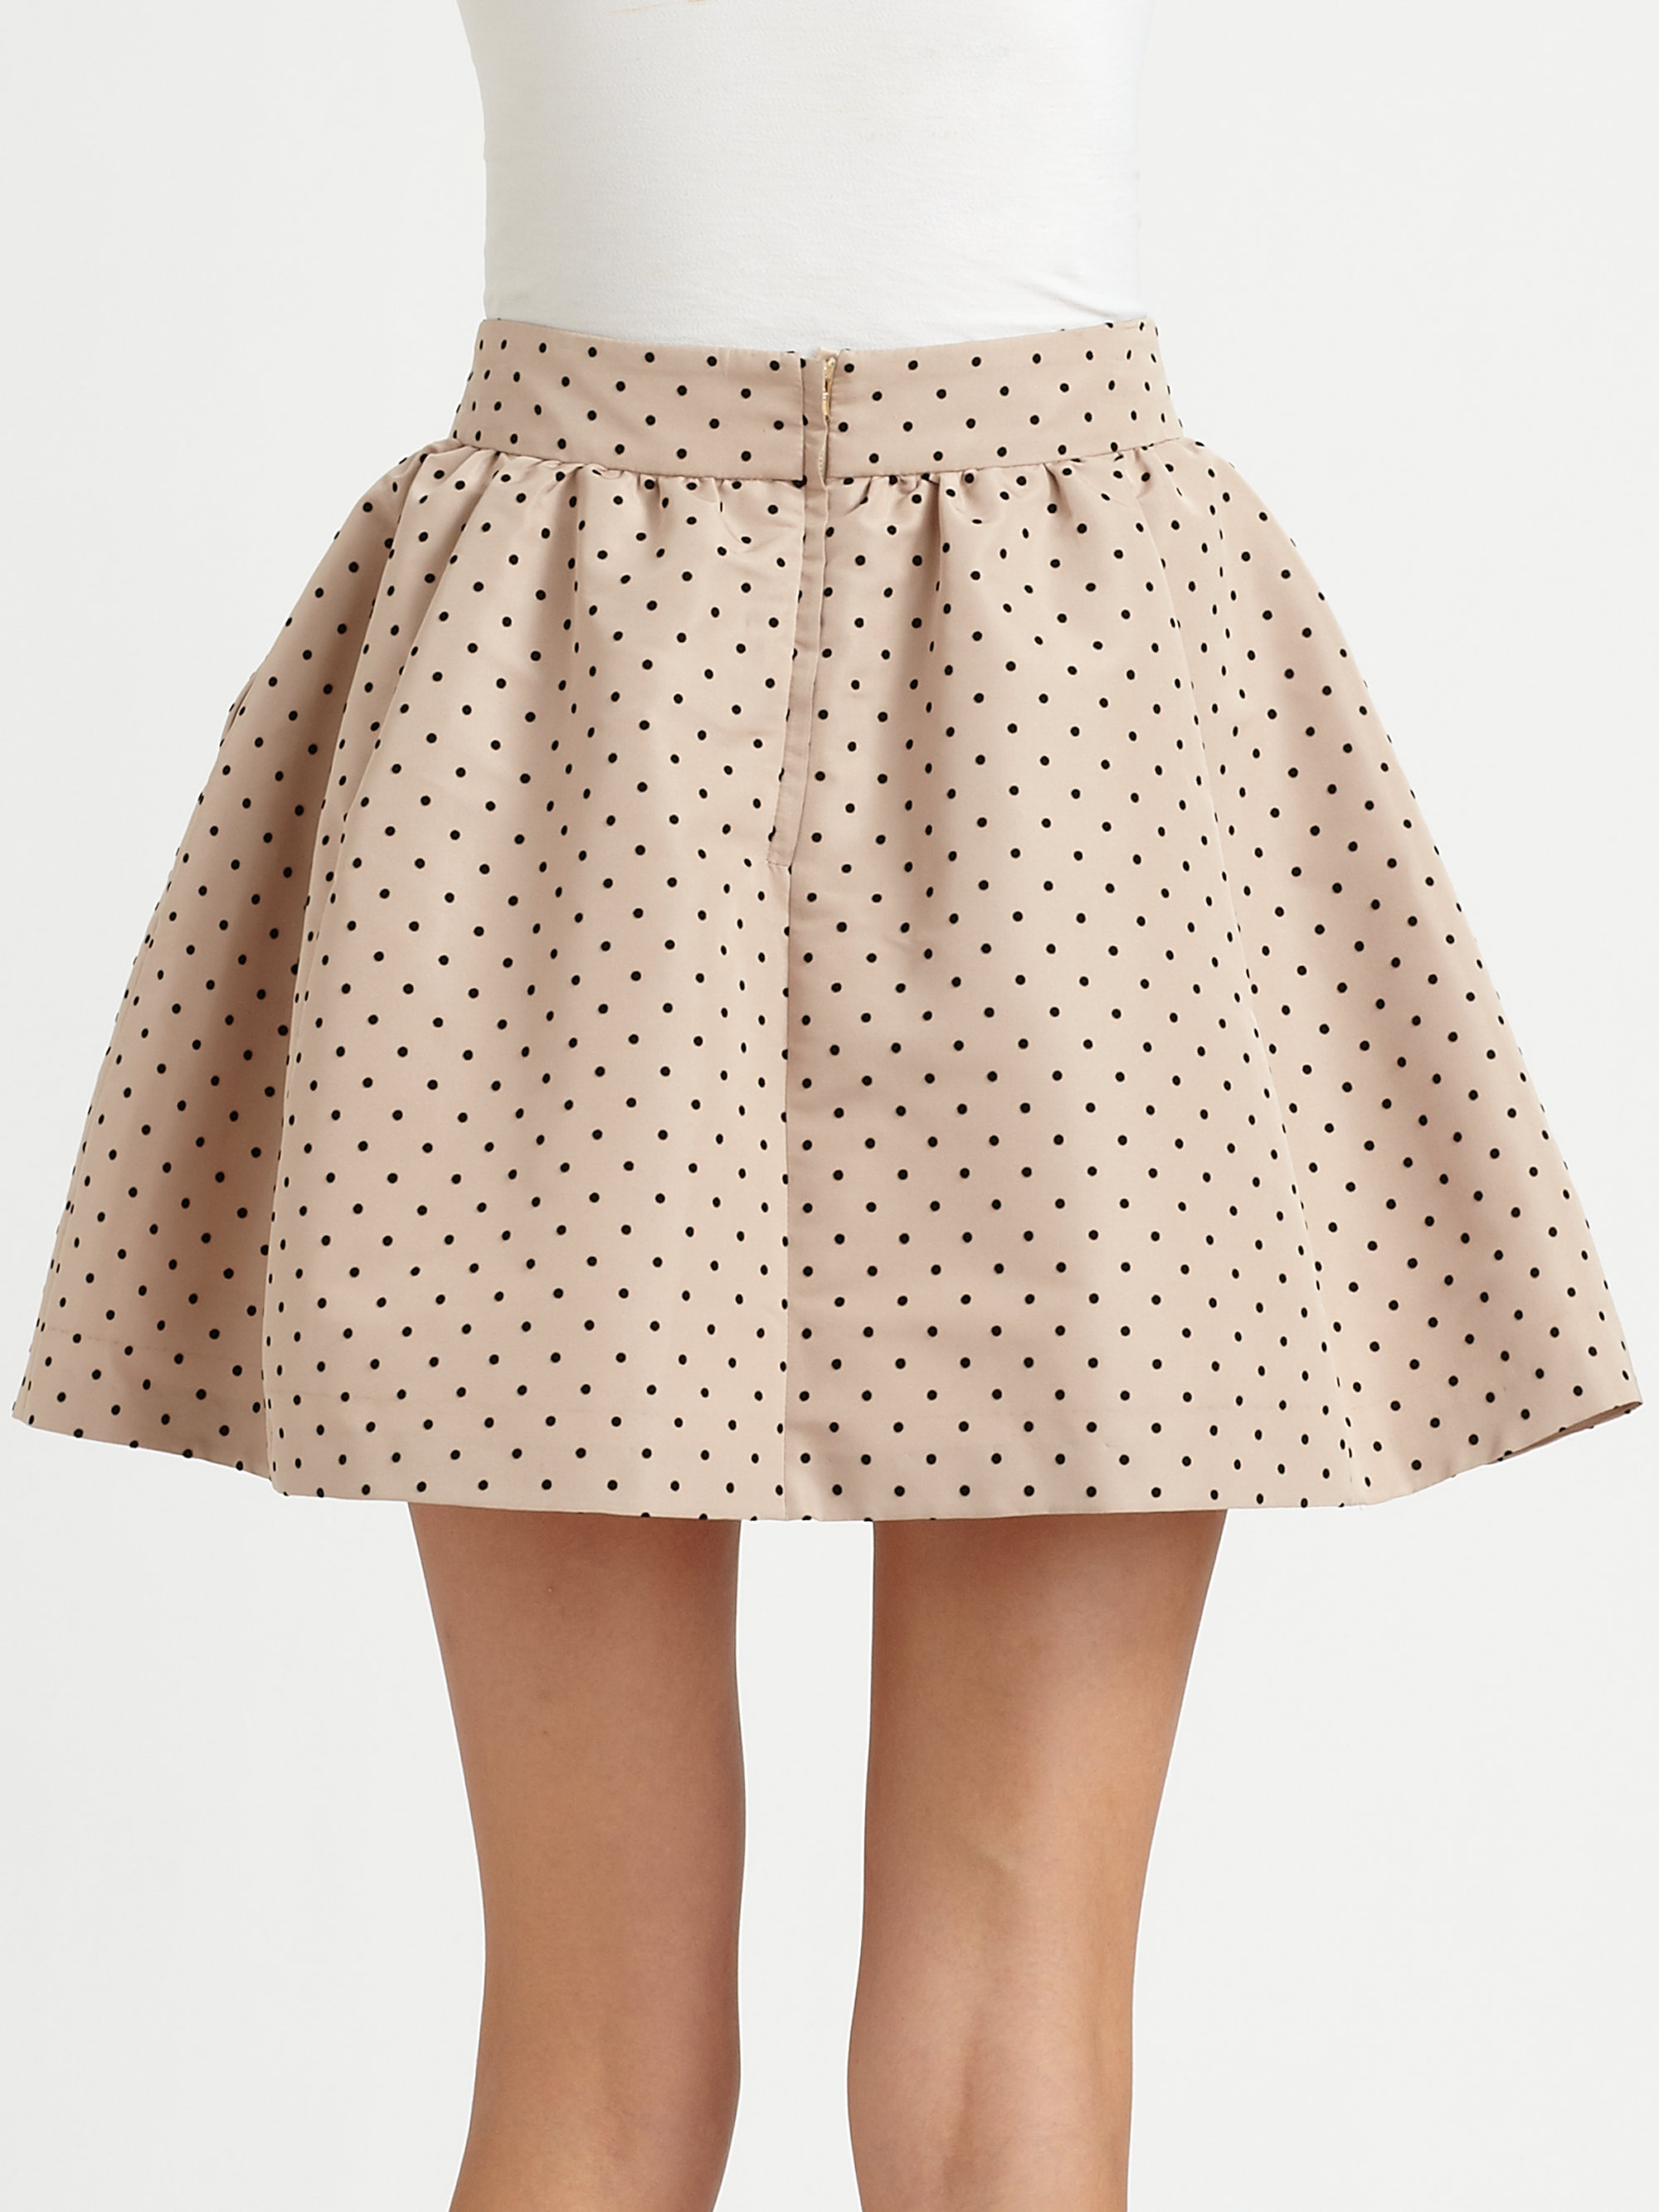 buy > red valentino pink skirt > Up to 64% OFF > Free shipping